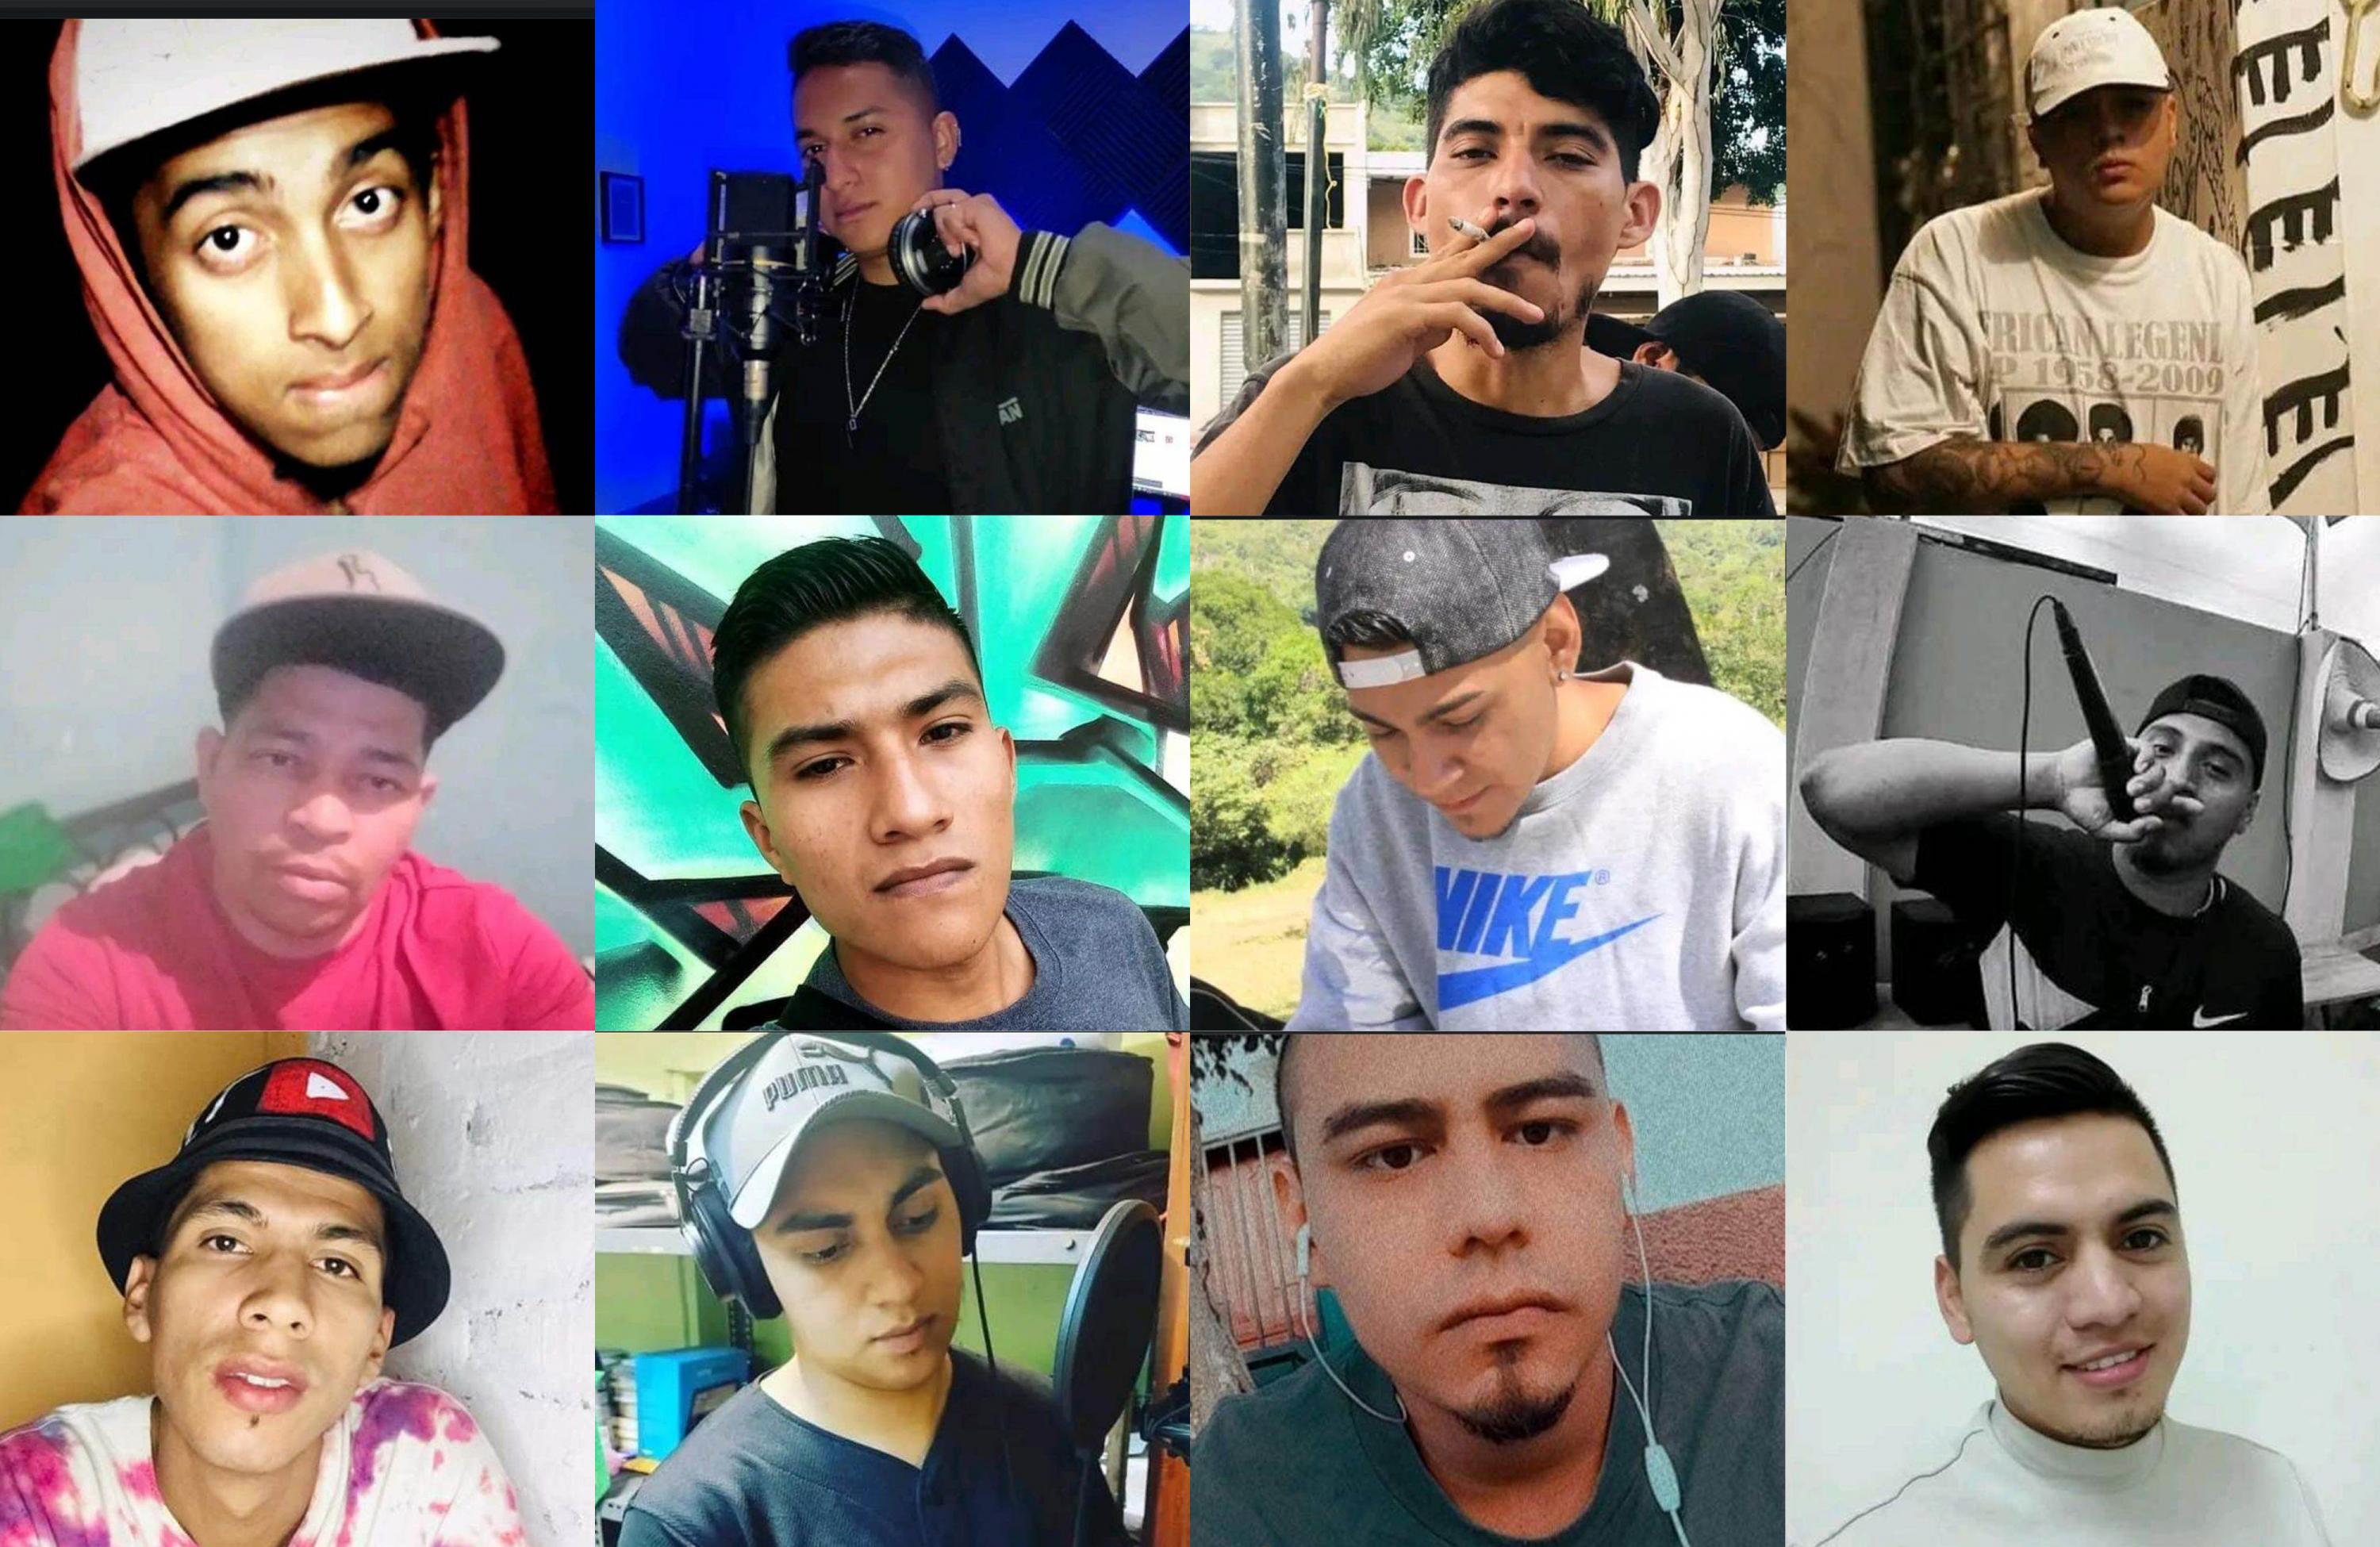 Salvadoran hip-hop collectives circulated photographs of some of the rappers and freestylers imprisoned under the state of exception. “Justice for our brothers!” one message read.